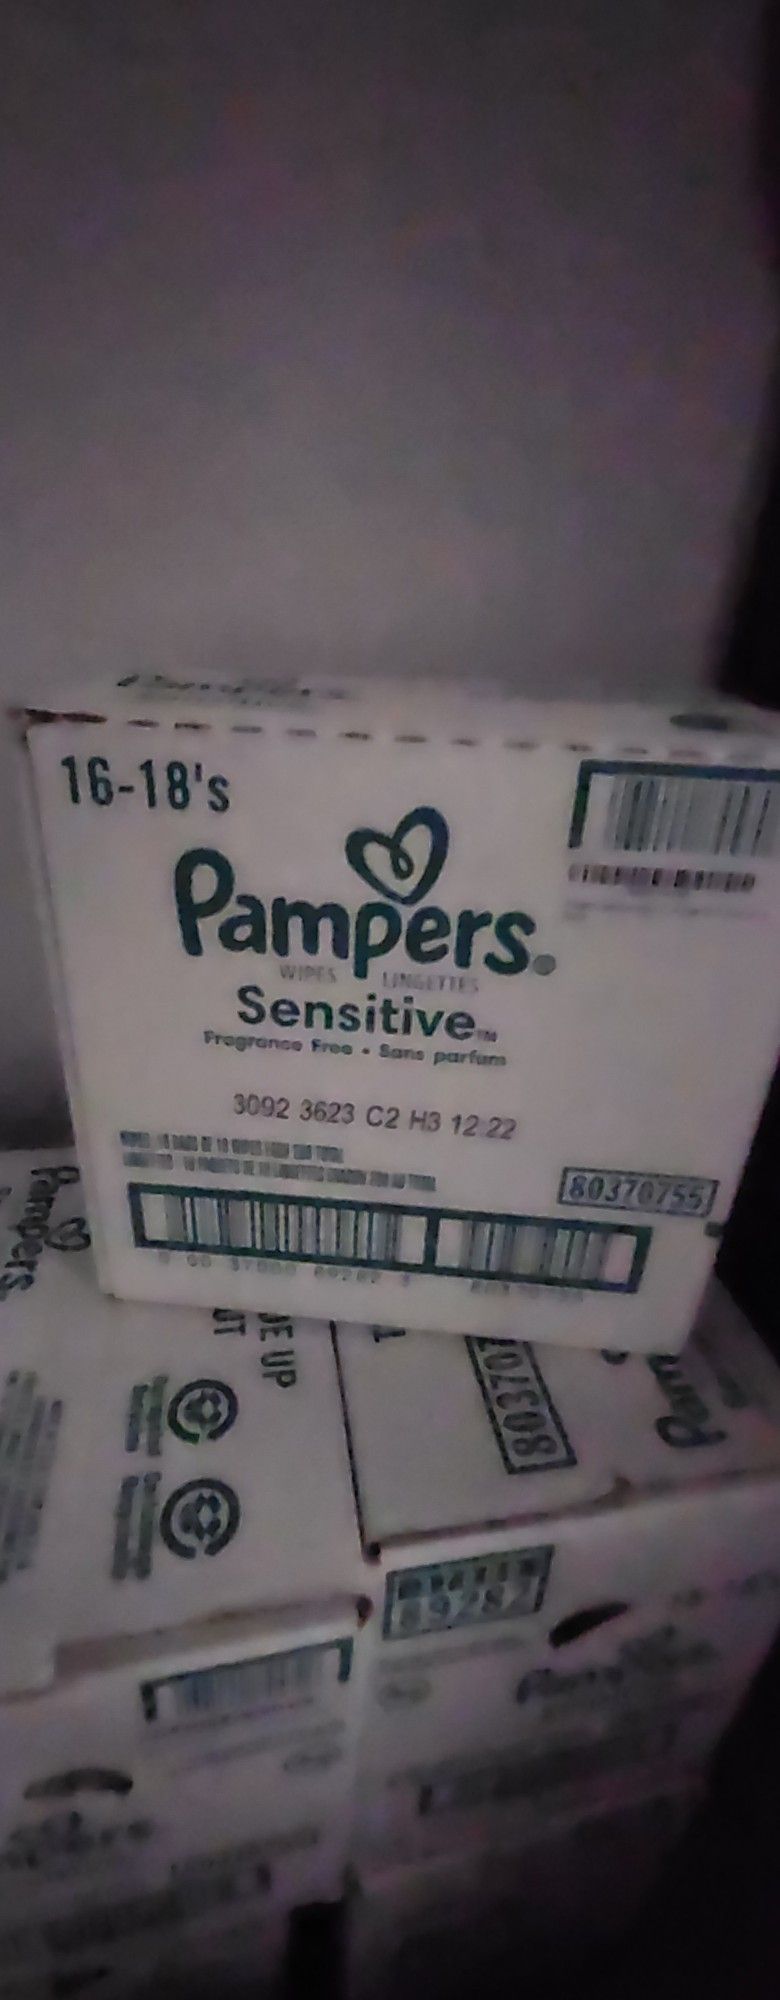 Pampers Sensitive Wipes 16 Pack (1 Box)